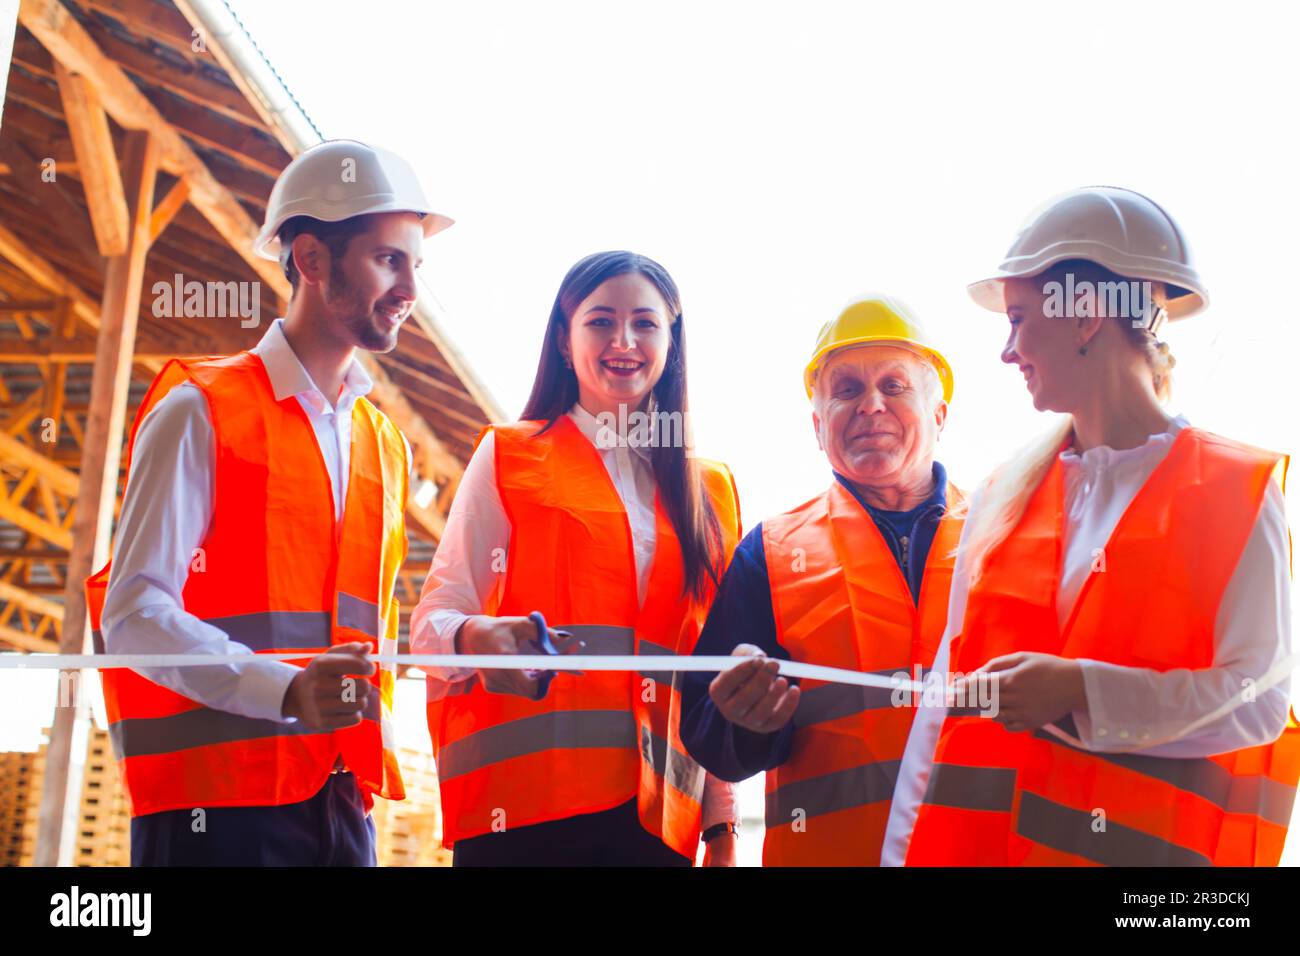 Official oppening of recently built plant or factory Stock Photo